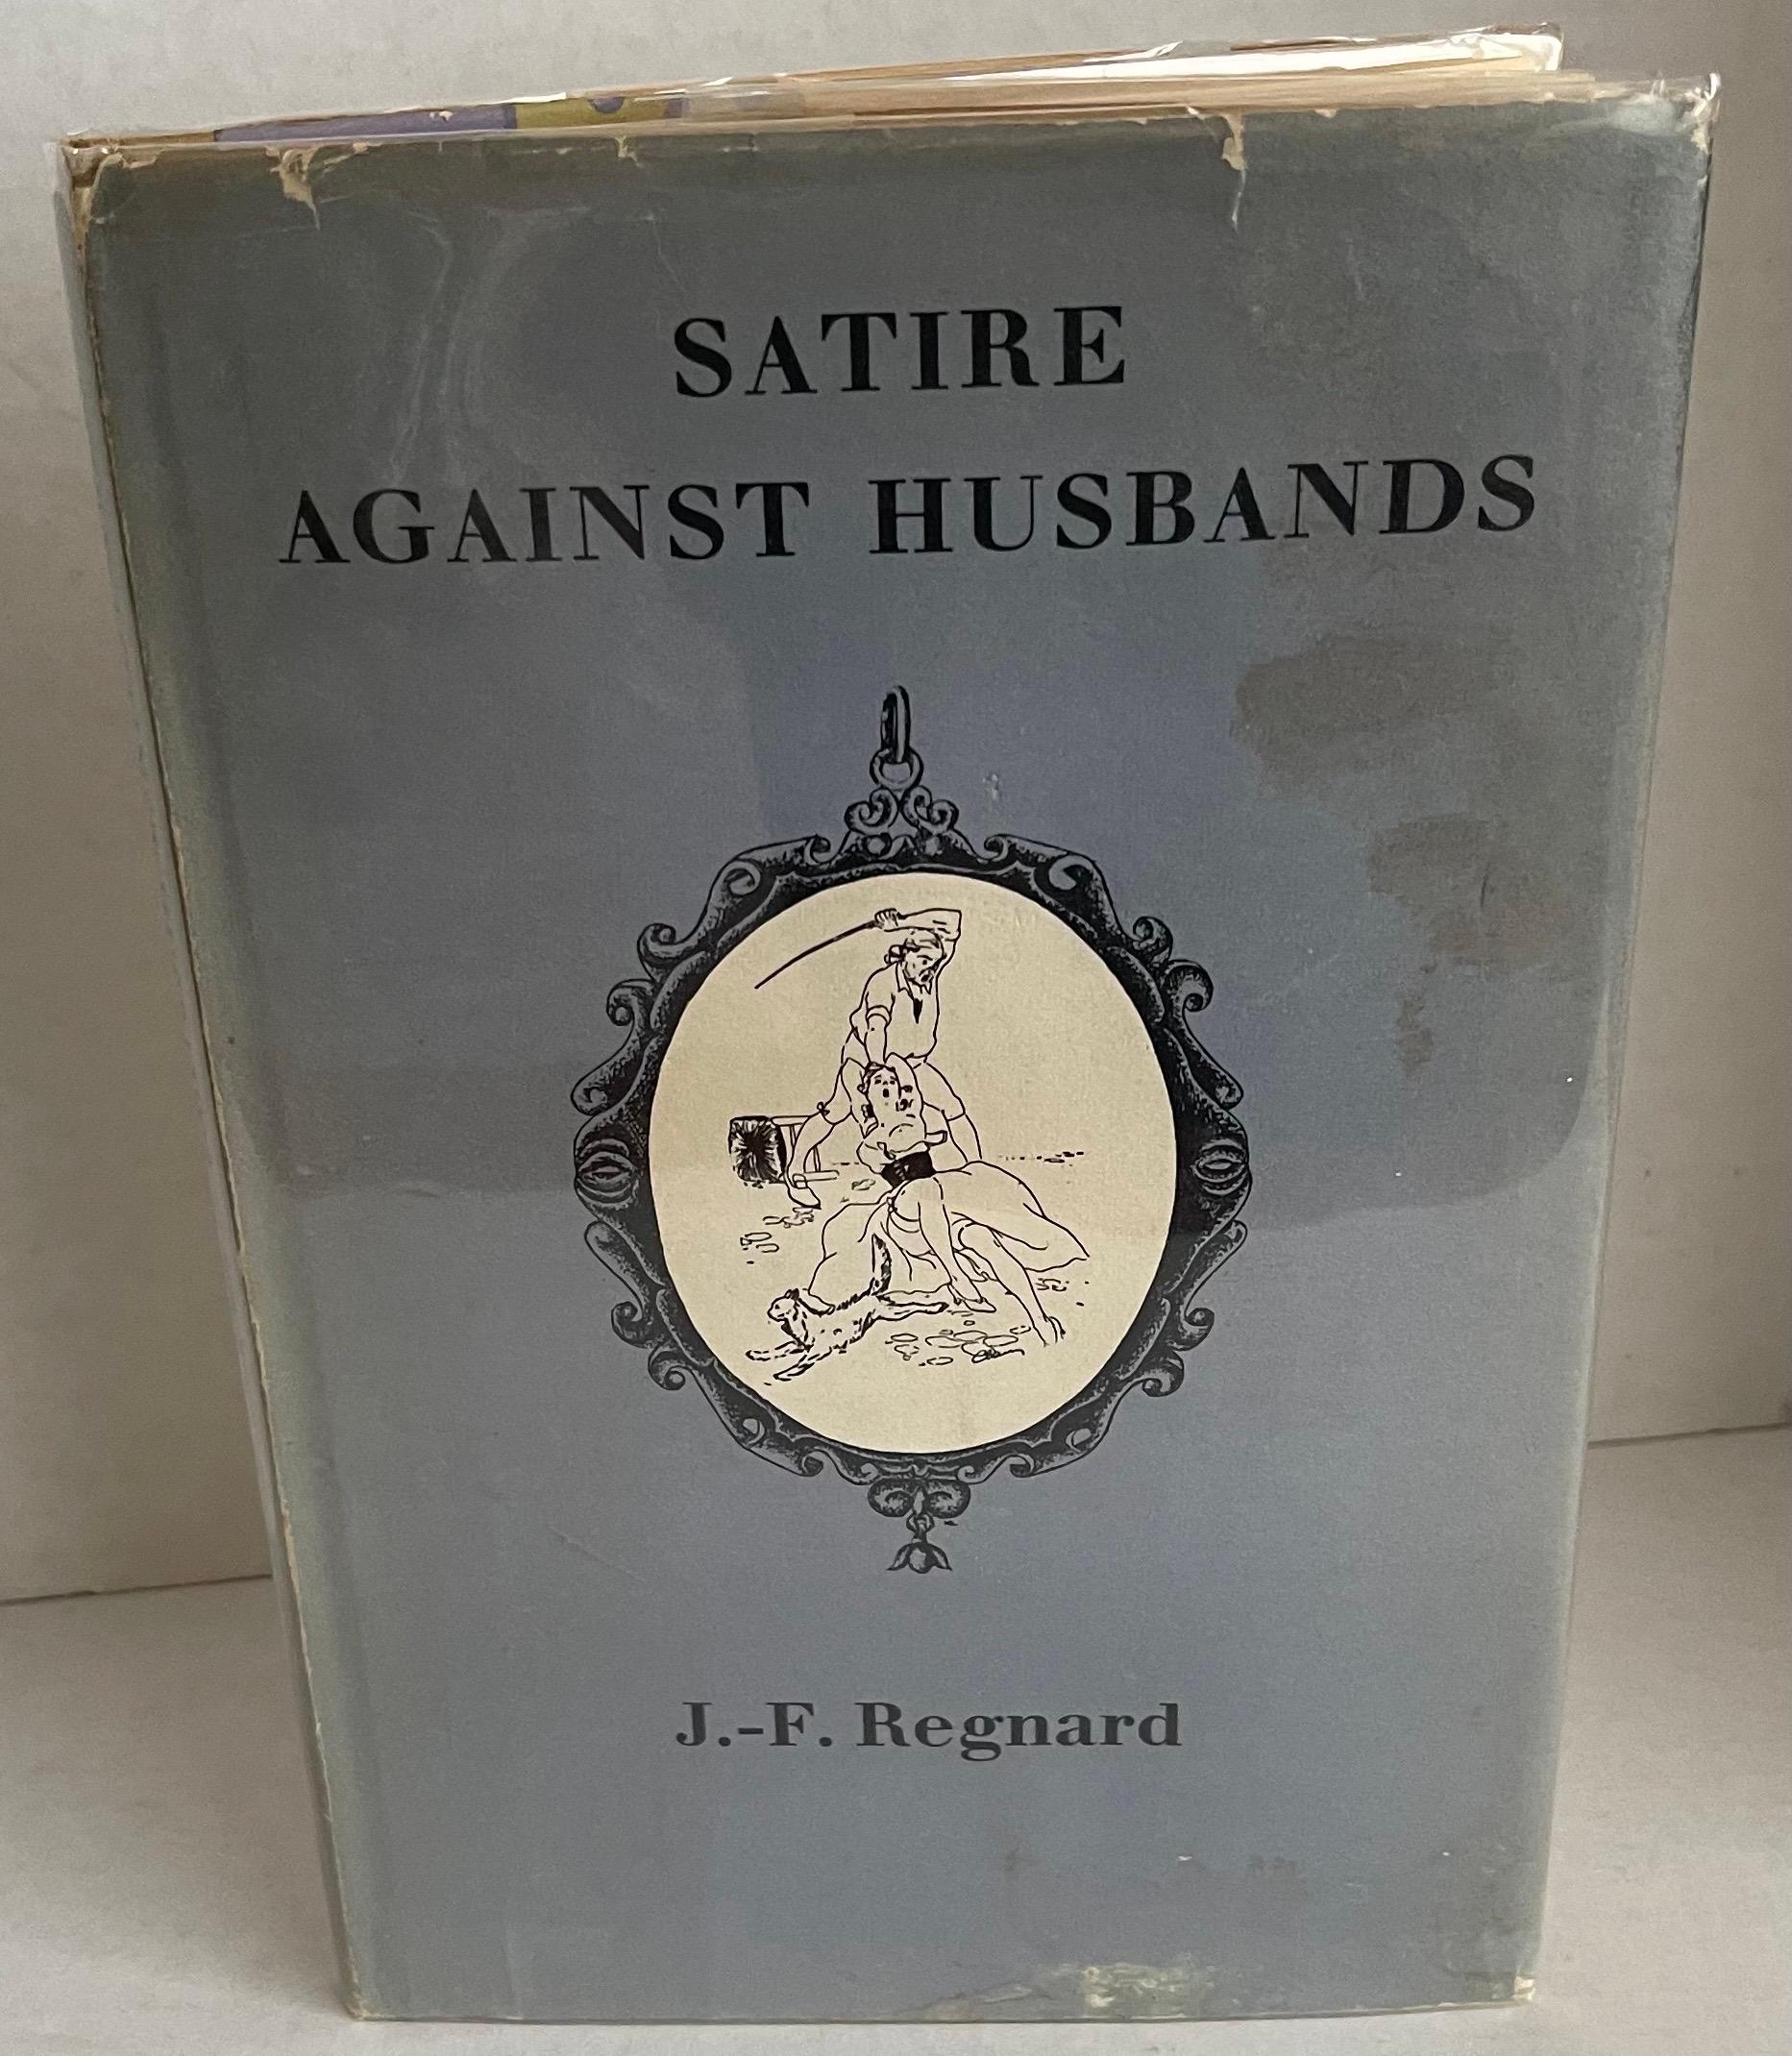 Satire Against Husbands by J. F. Regnard,. Hardcover 1954 1st Edition. 
Mylar jacket has been added at later date. 